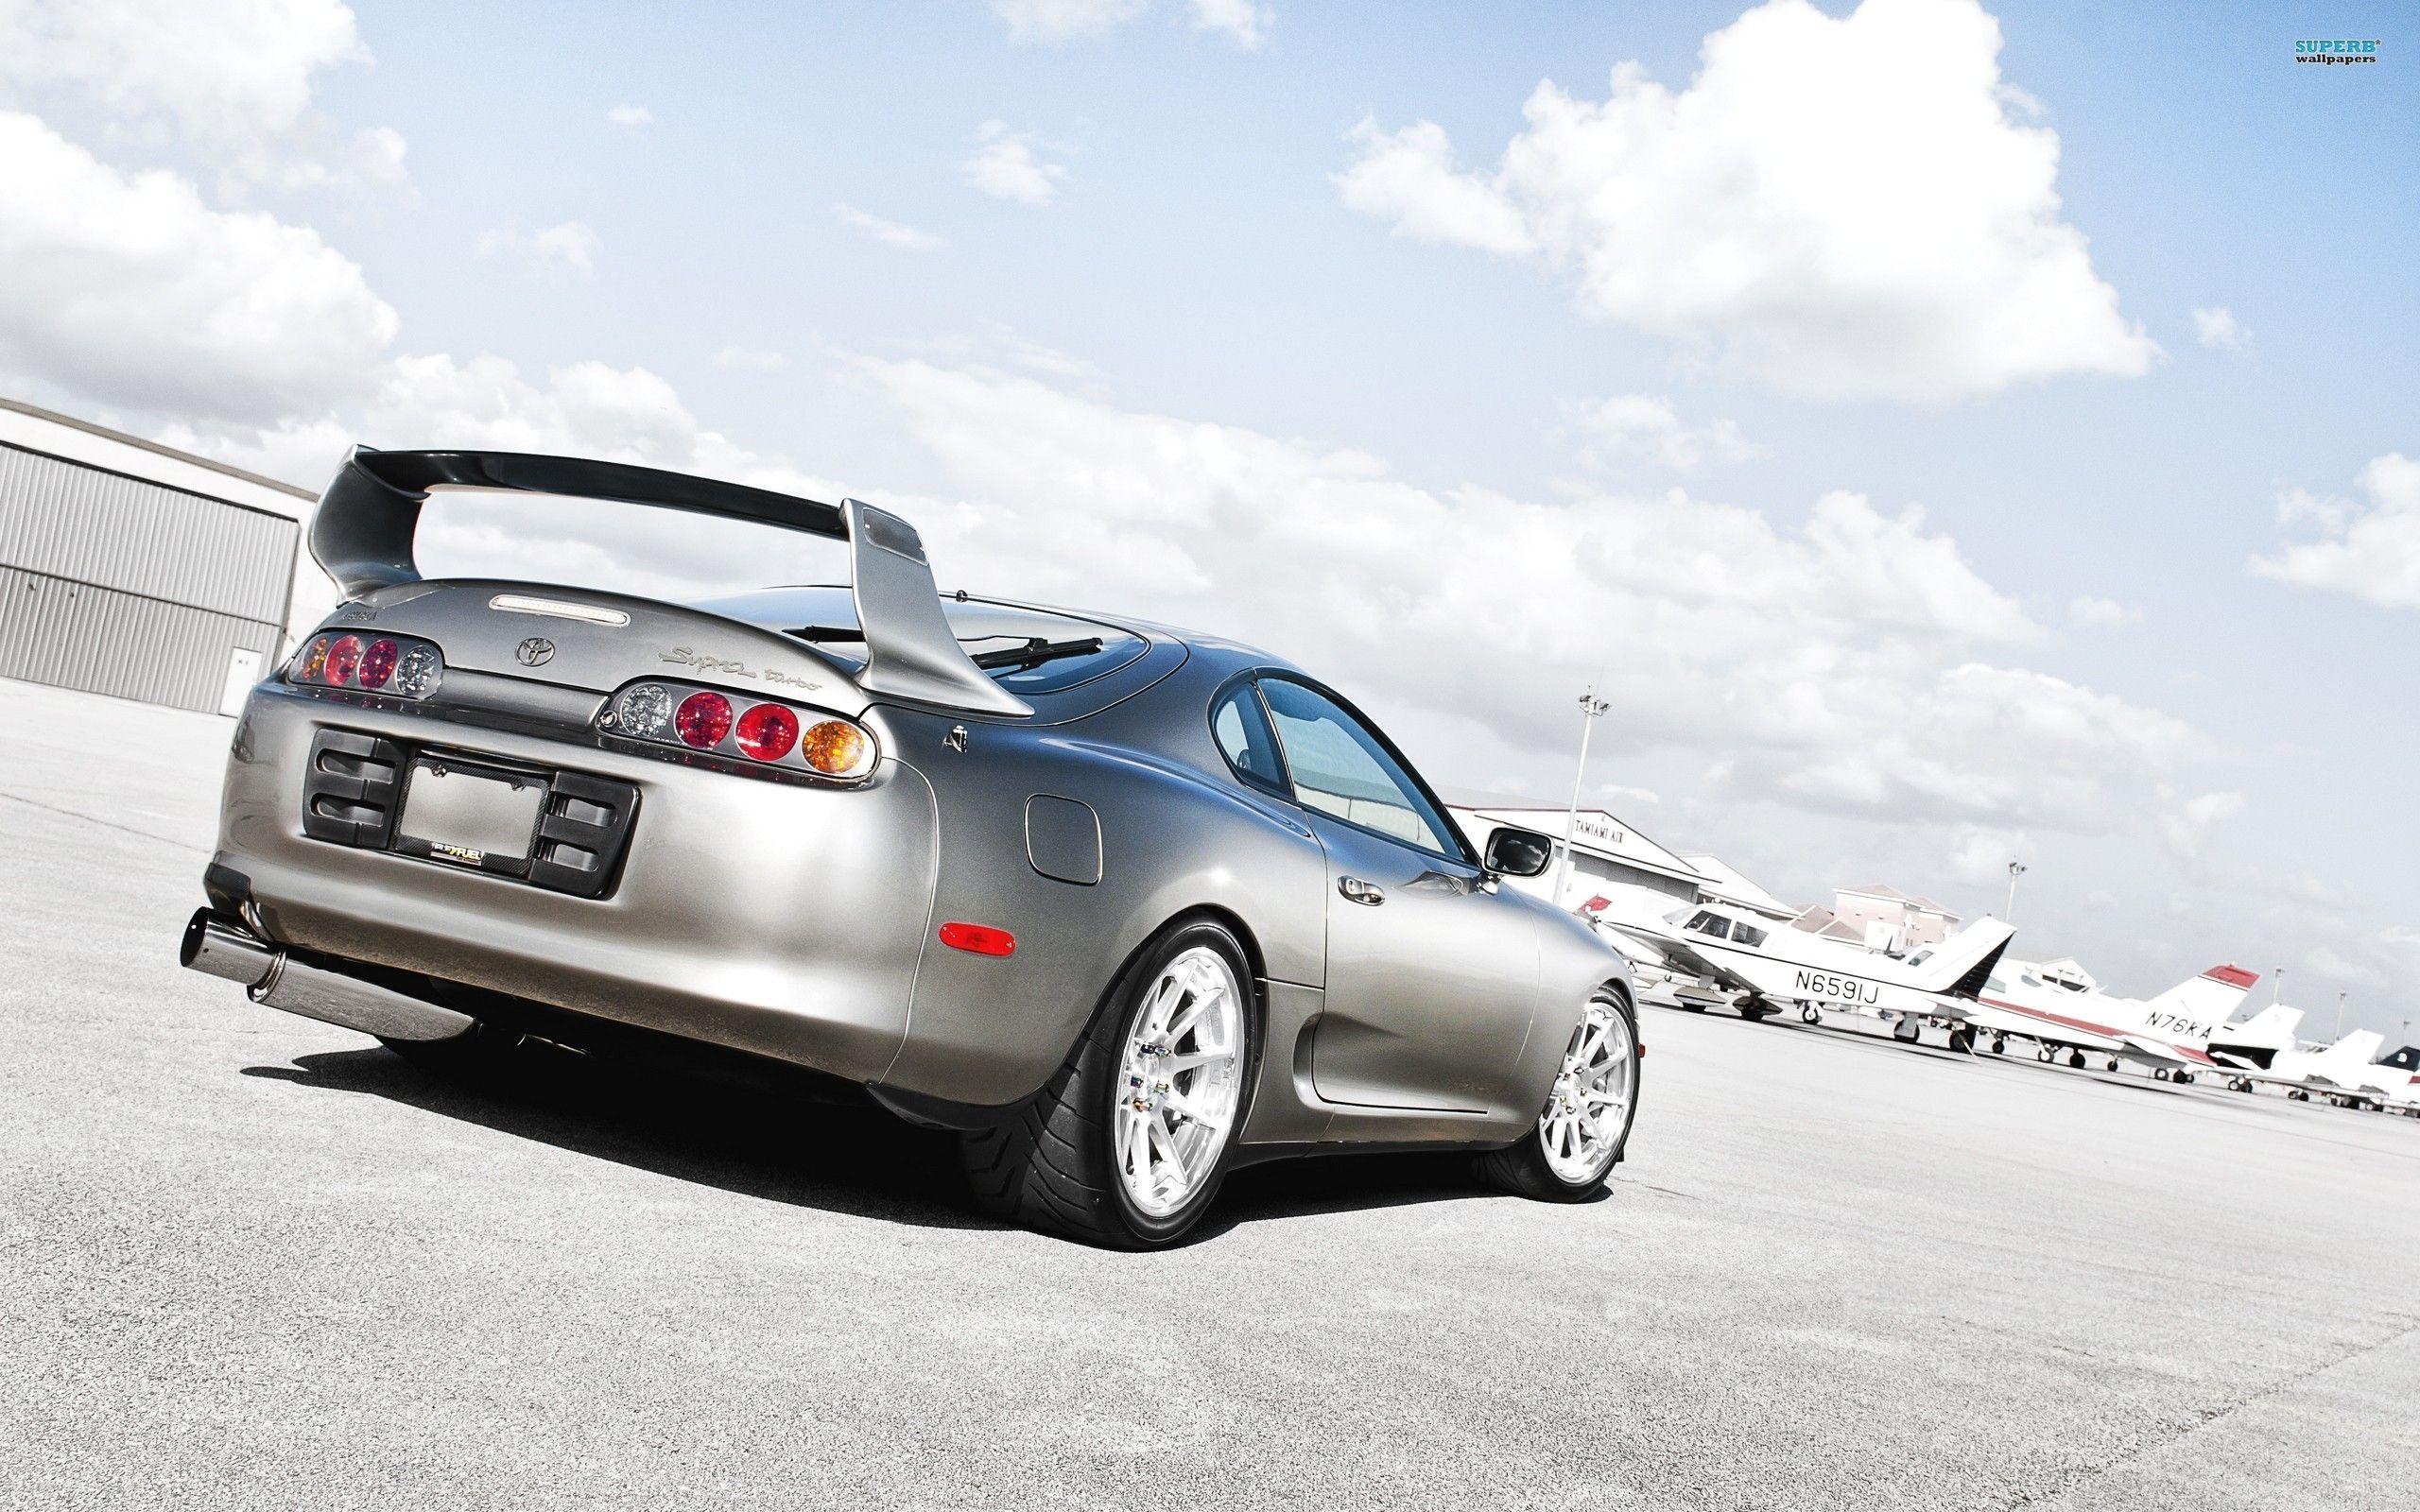 Toyota Supra Turbo. Best Cars Wallpaper Collections In Top Sellers